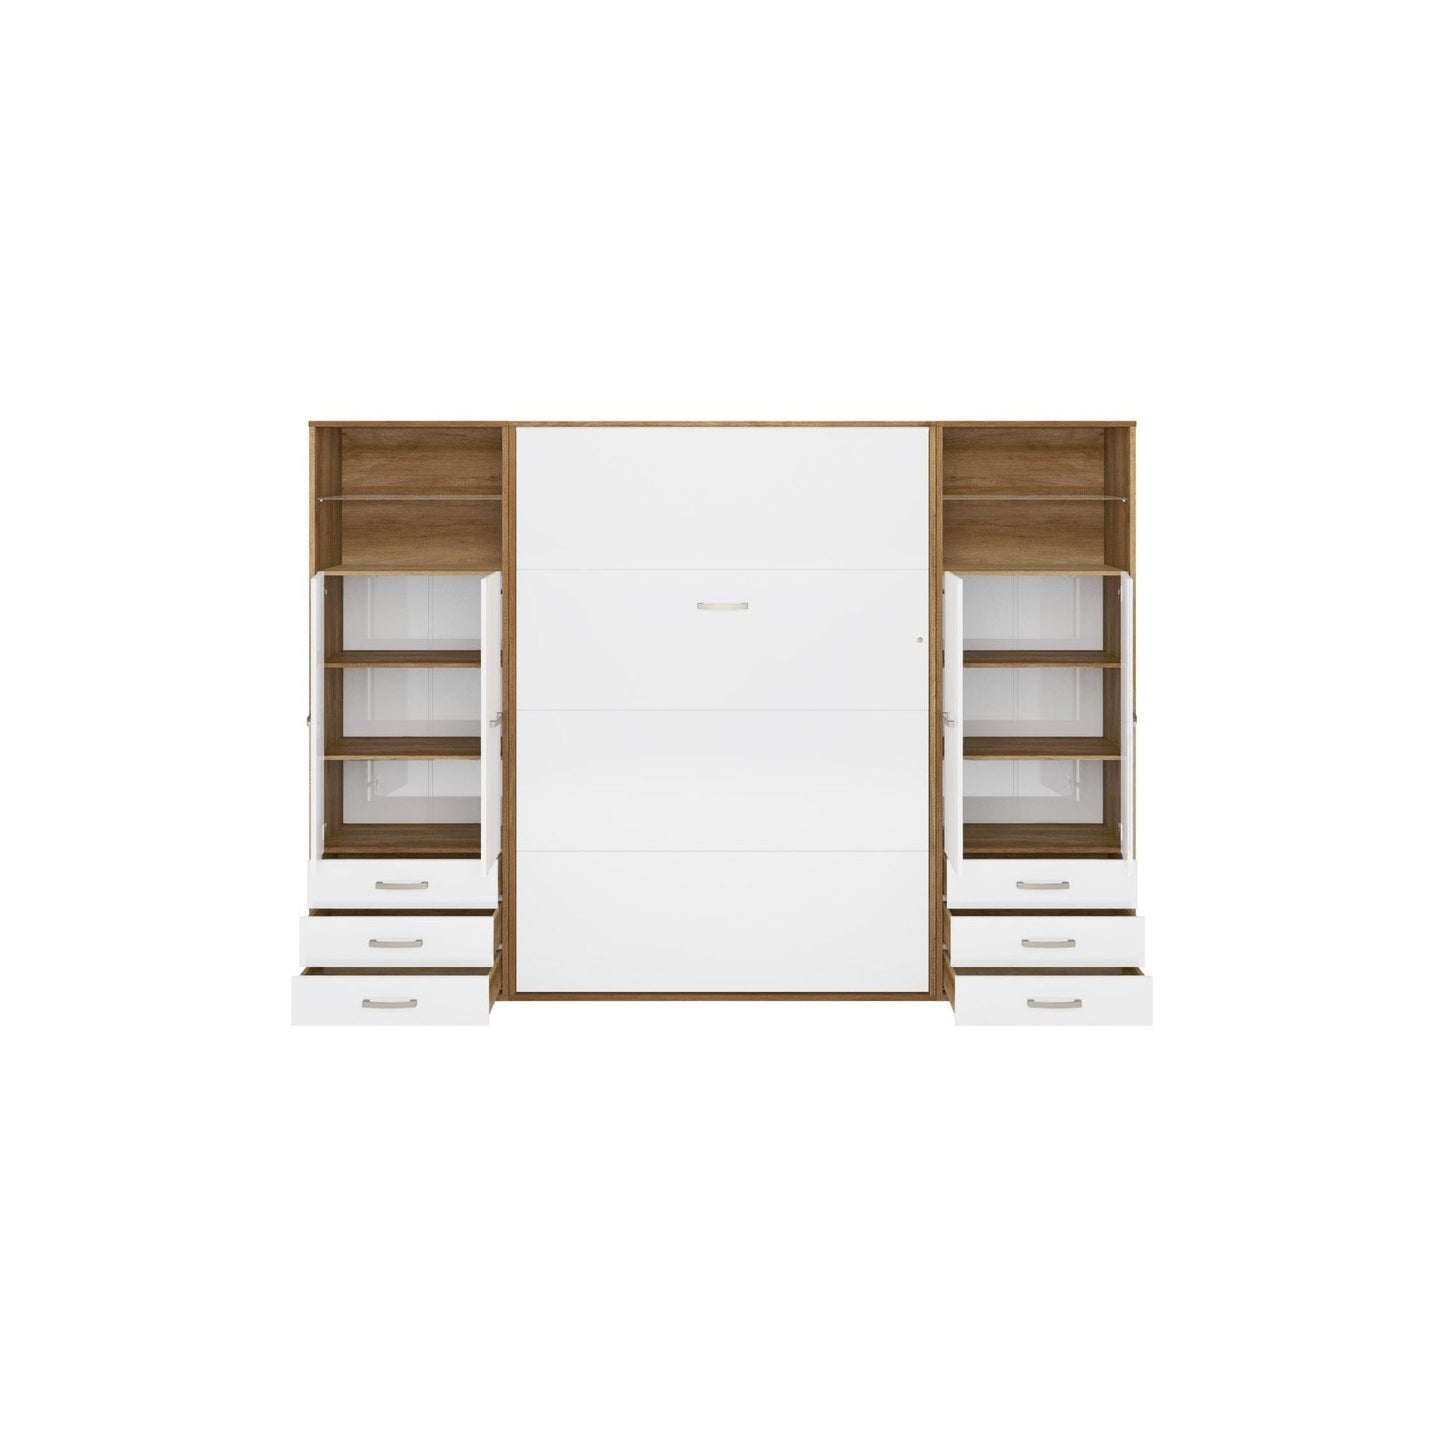 Maxima House Maxima House Vertical Wall Bed Invento, European Full Size with 2 cabinets